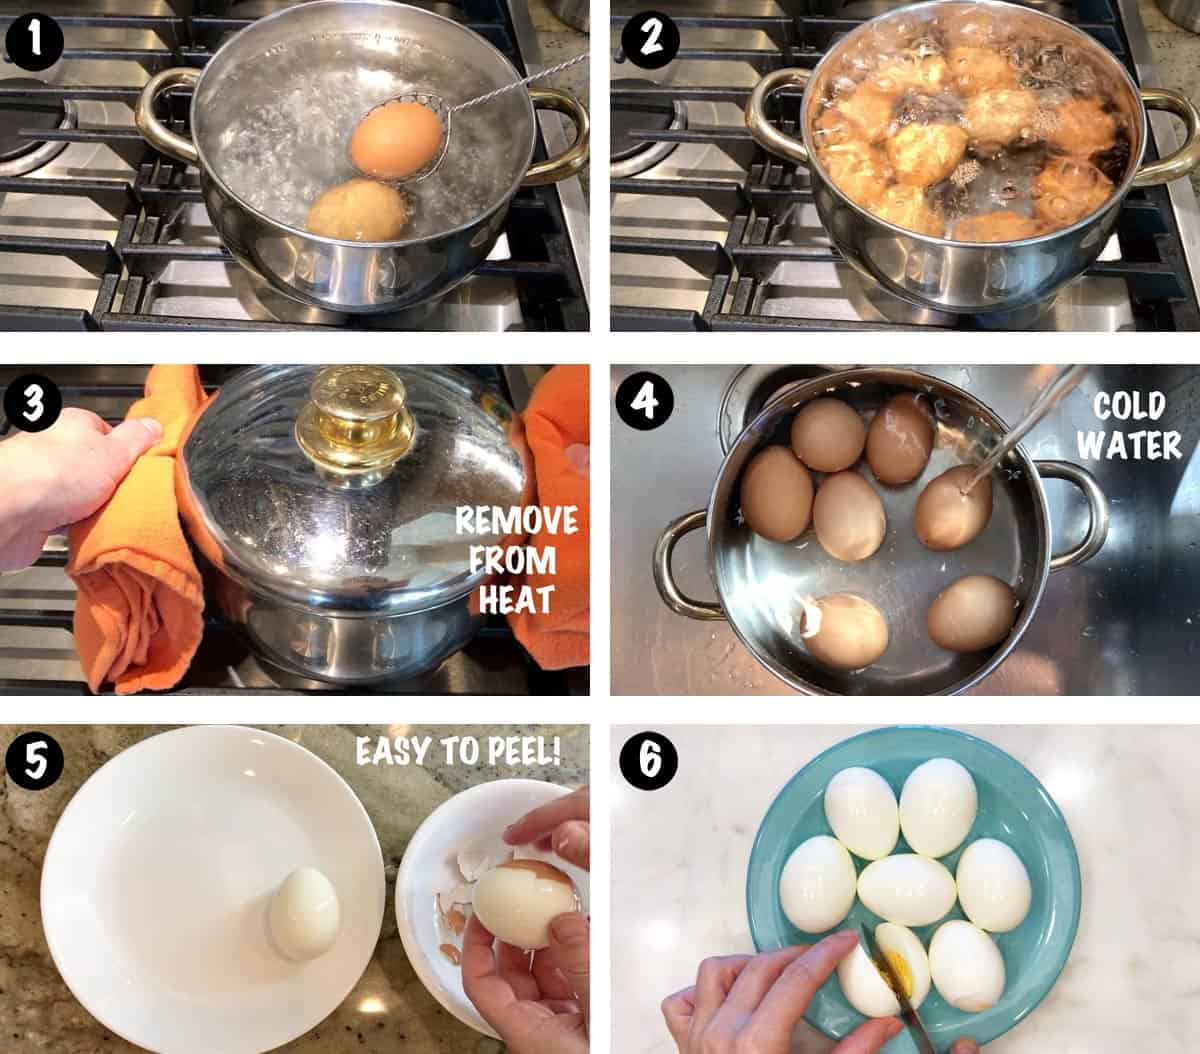 A six-photo collage showing the steps for making hard-boiled eggs.